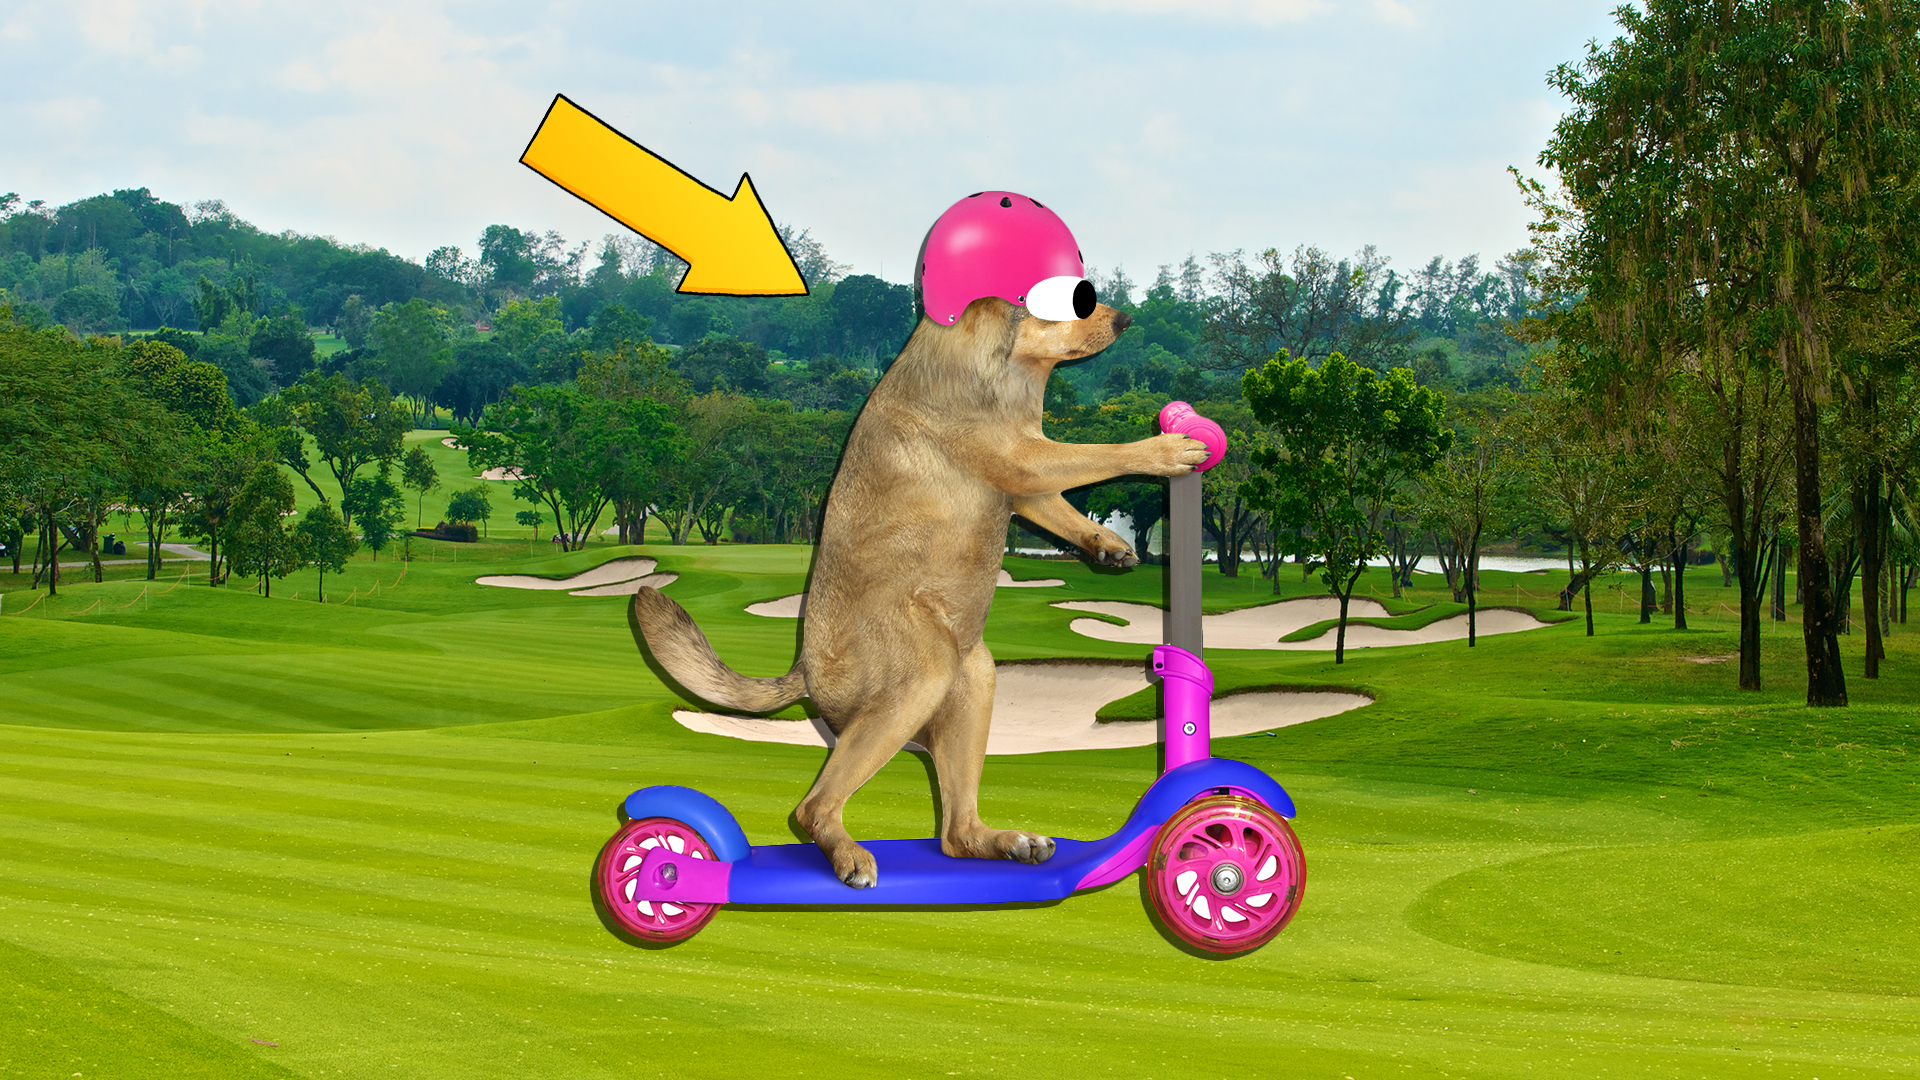 A dog rides a scooter across a golf course